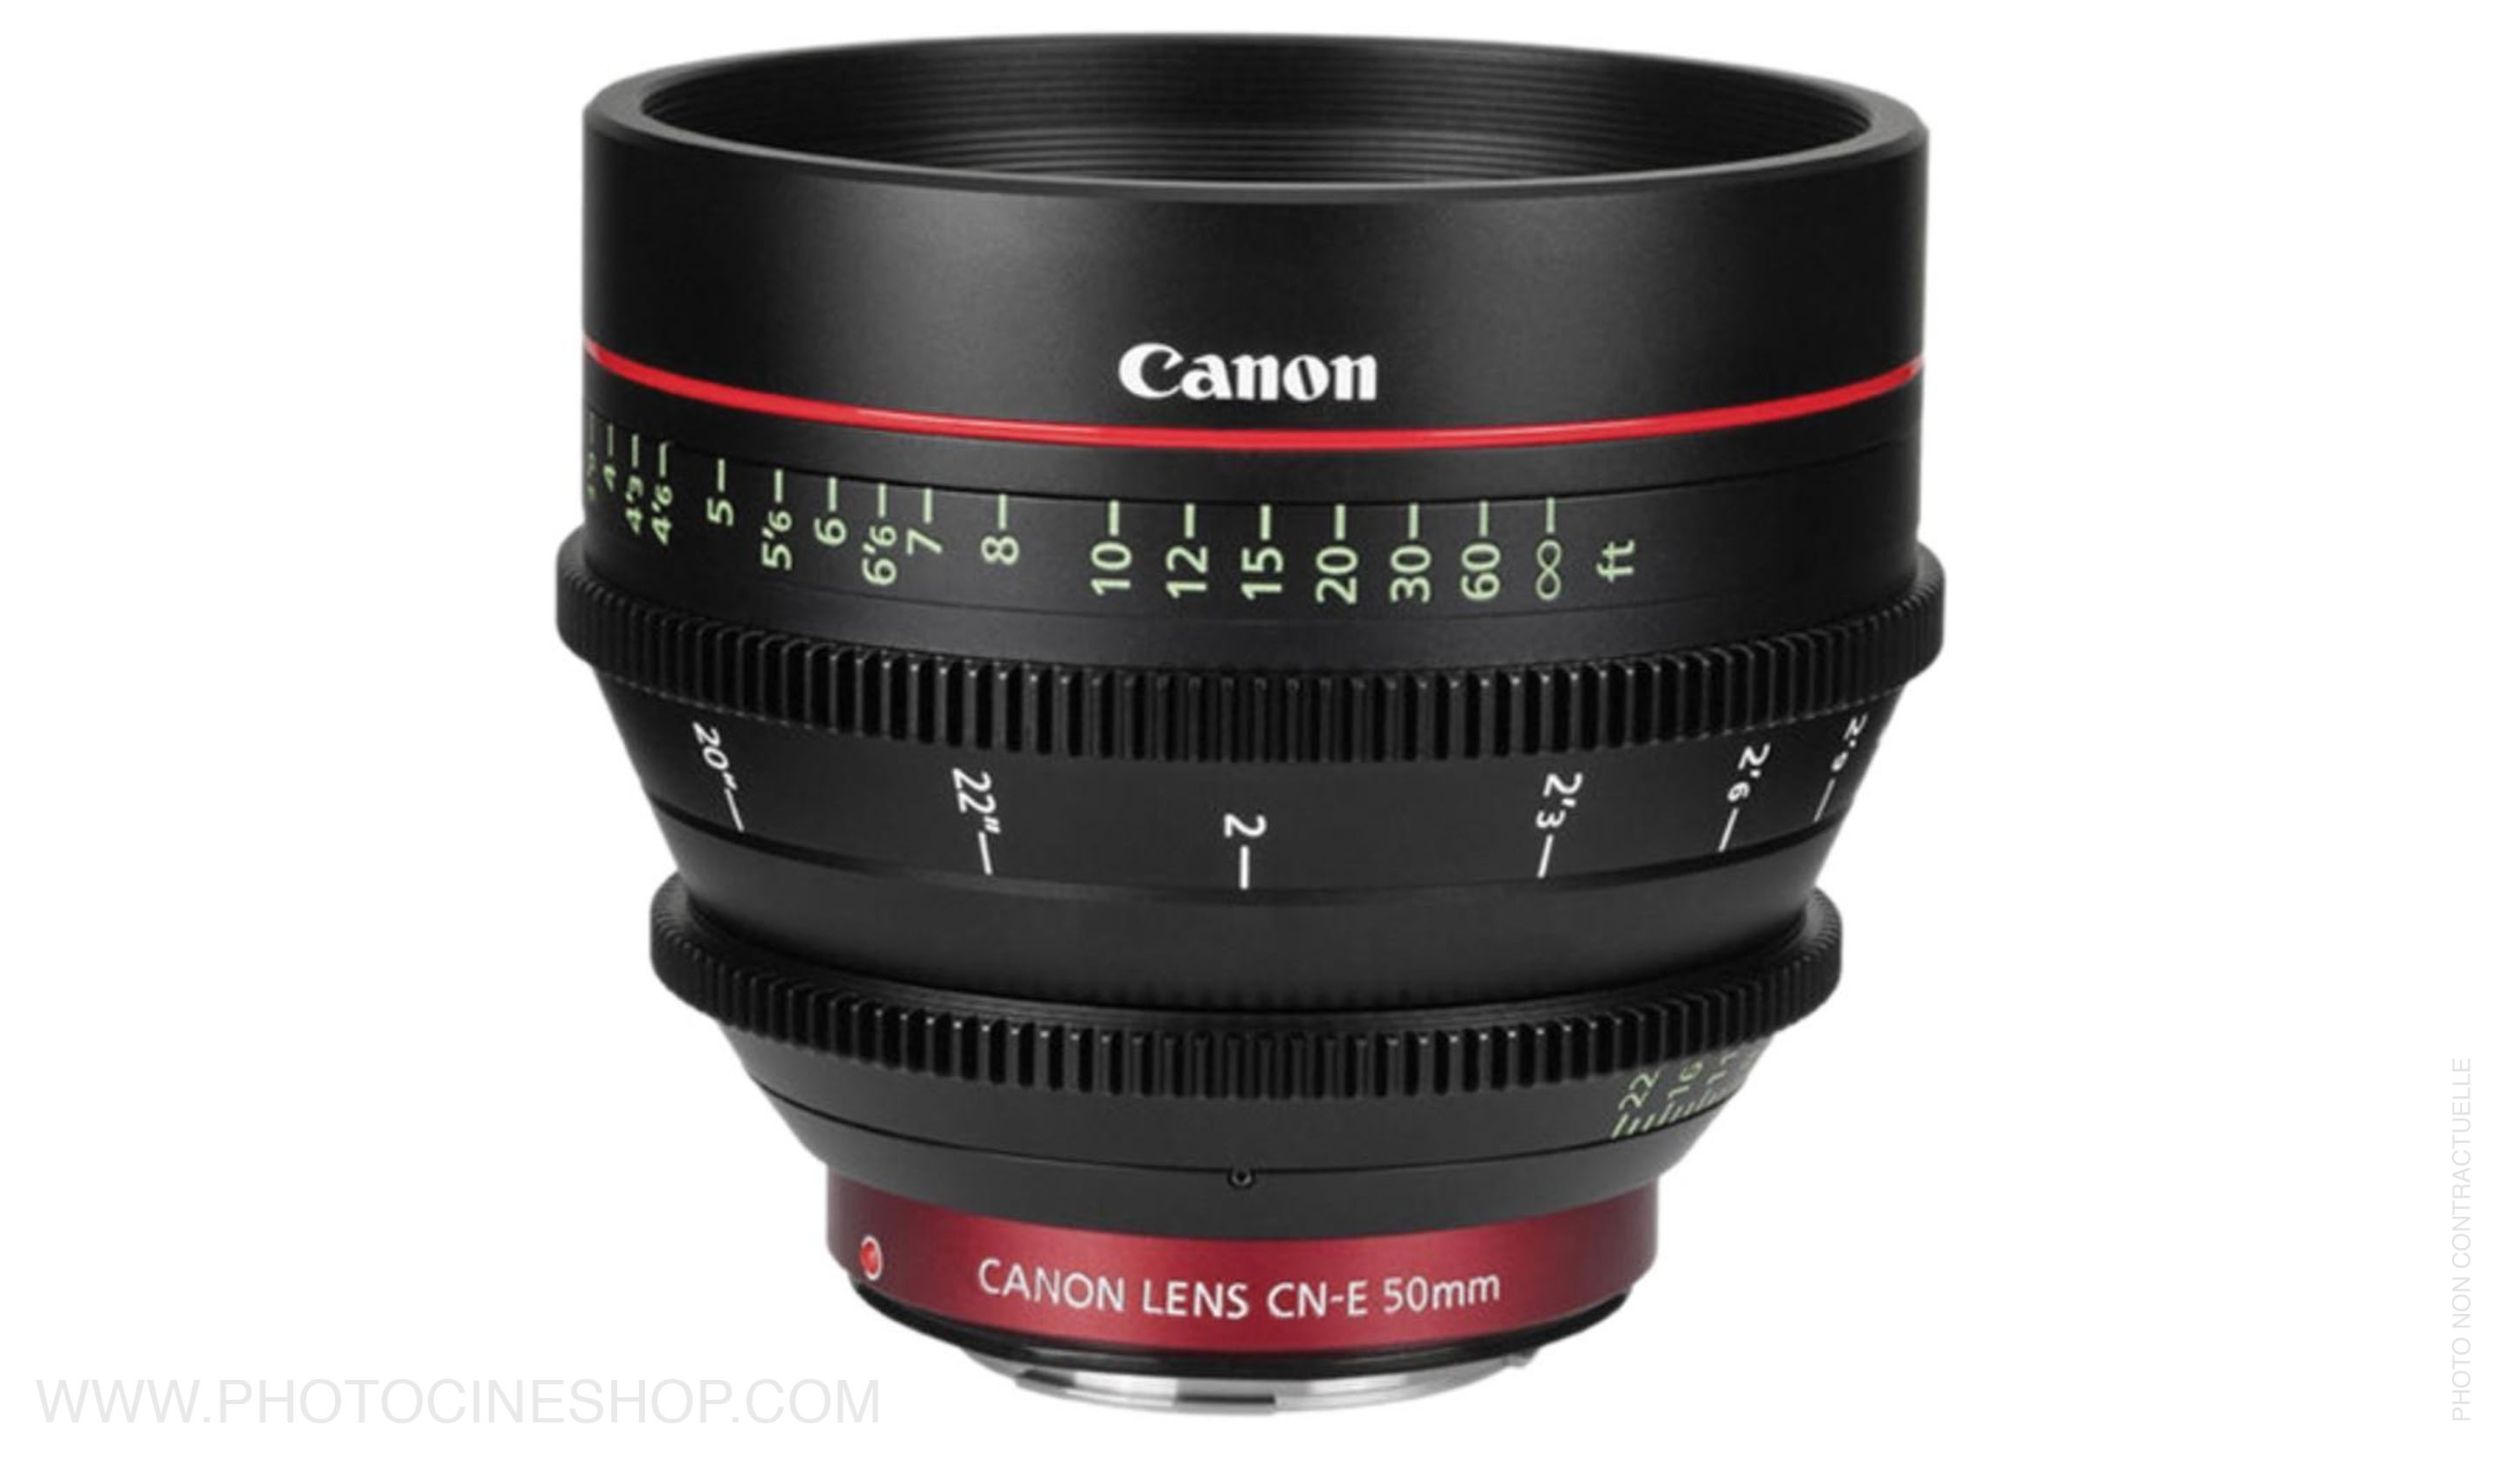 CANON - CN-E 50mm T1.3 EF (meters)